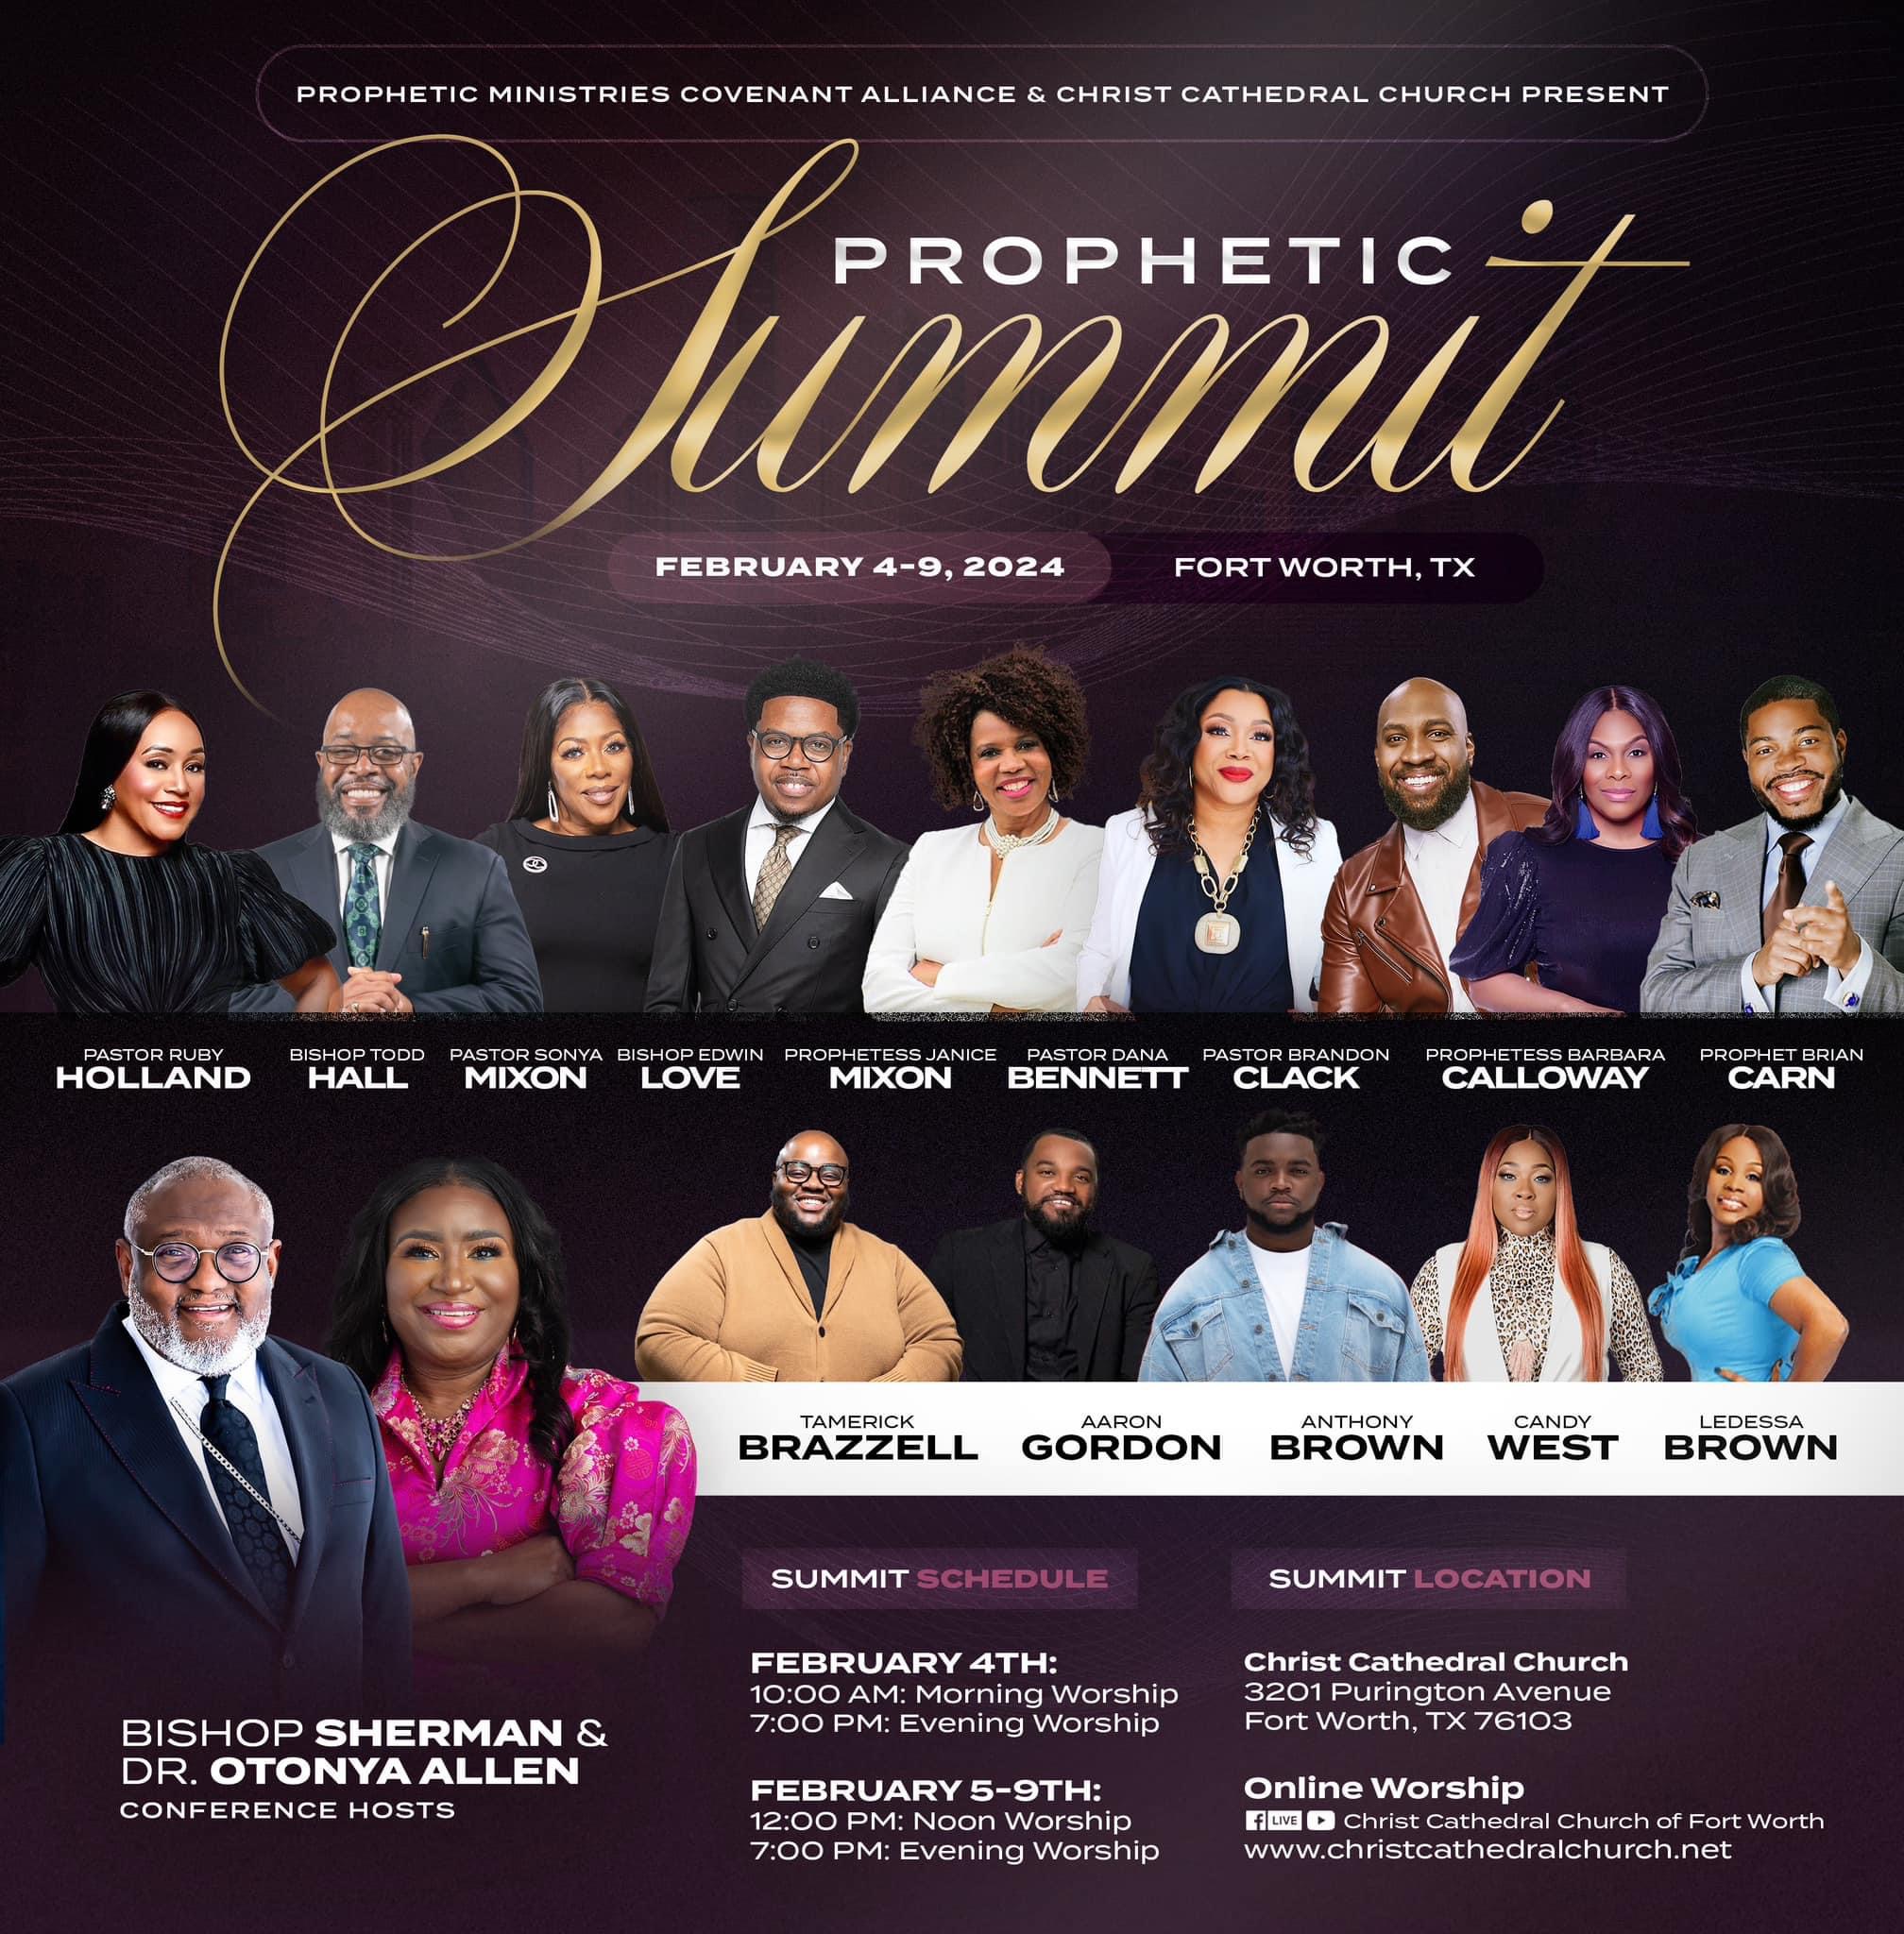 The Prophetic Summit 2024 (Fort Worth, TX) Brian Carn Ministries